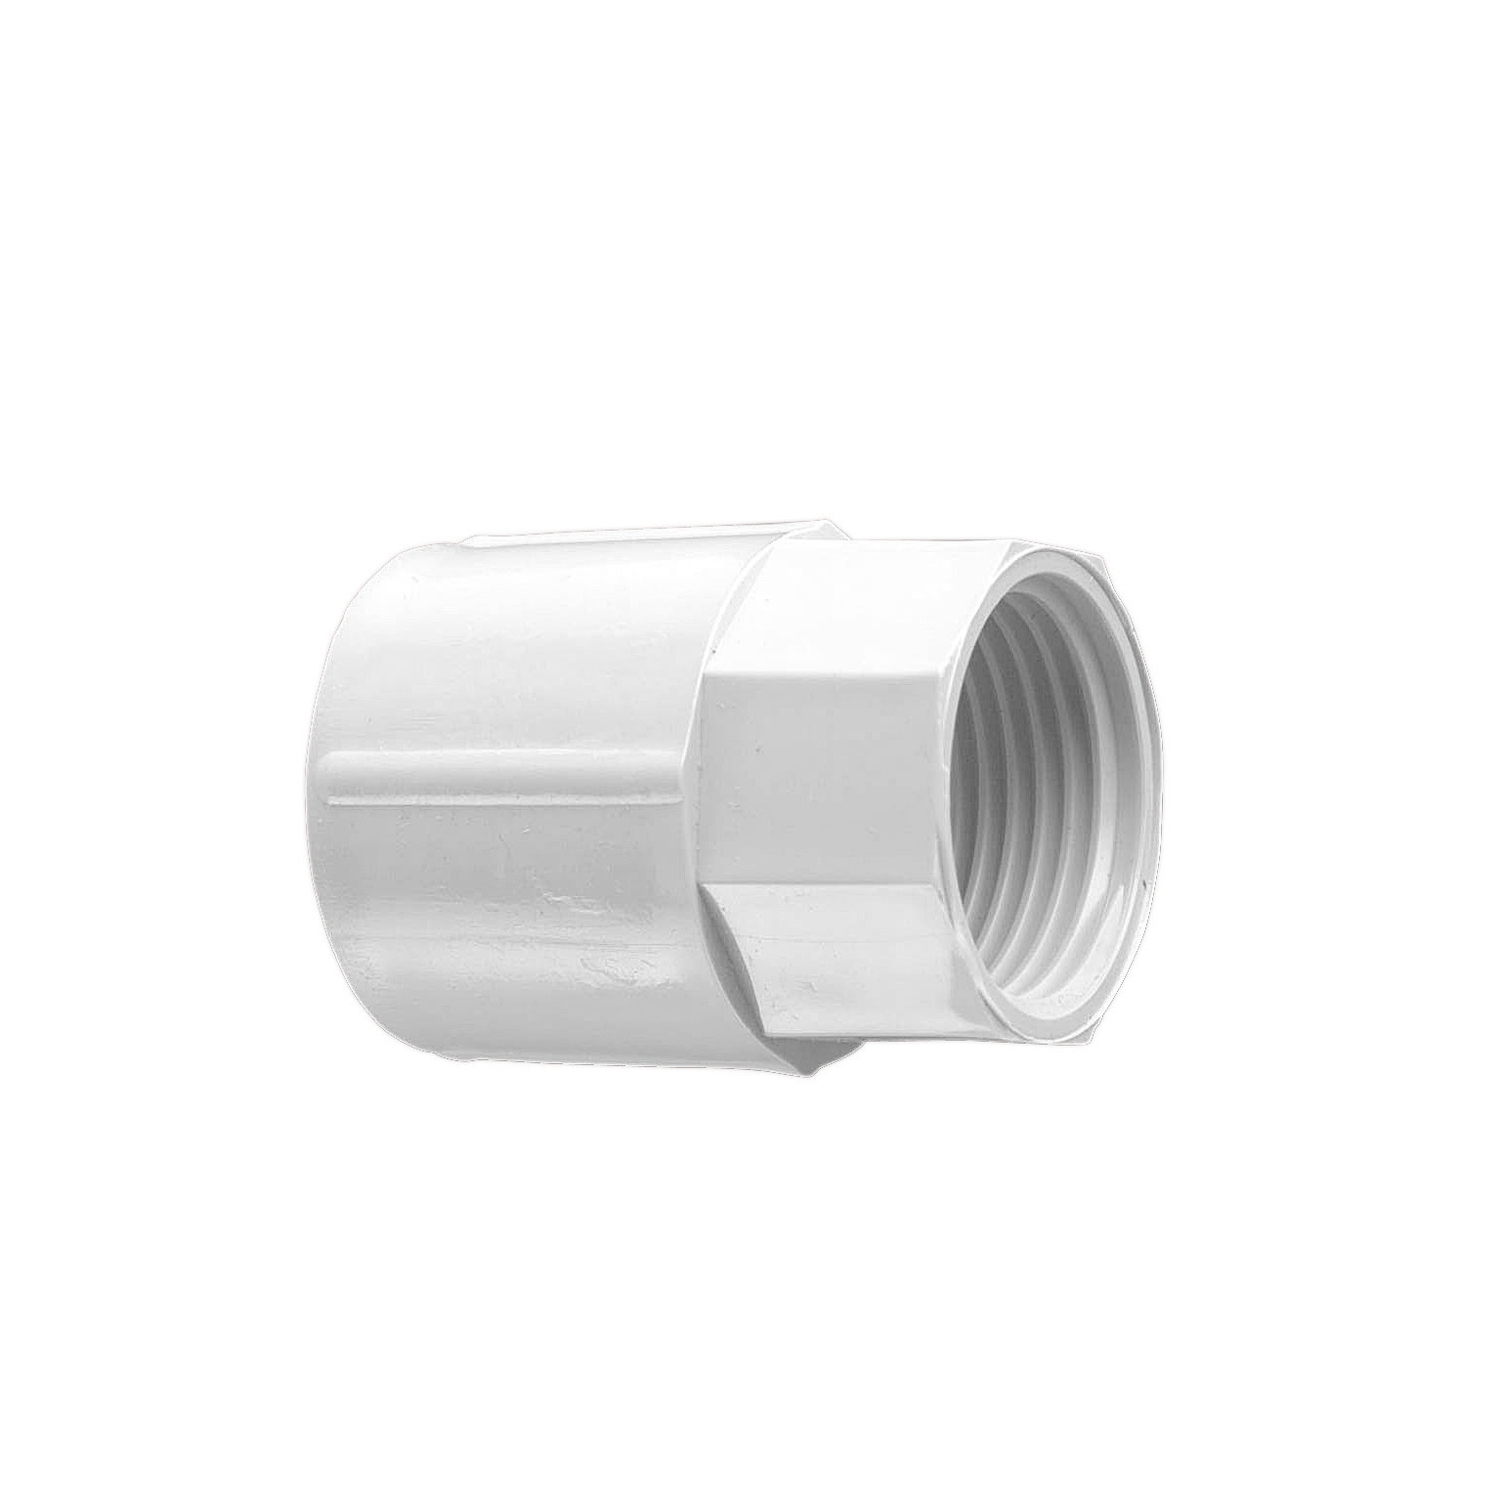 Solid Fittings - PVC, Plain To Screwed Couplings, 16mm, Grey